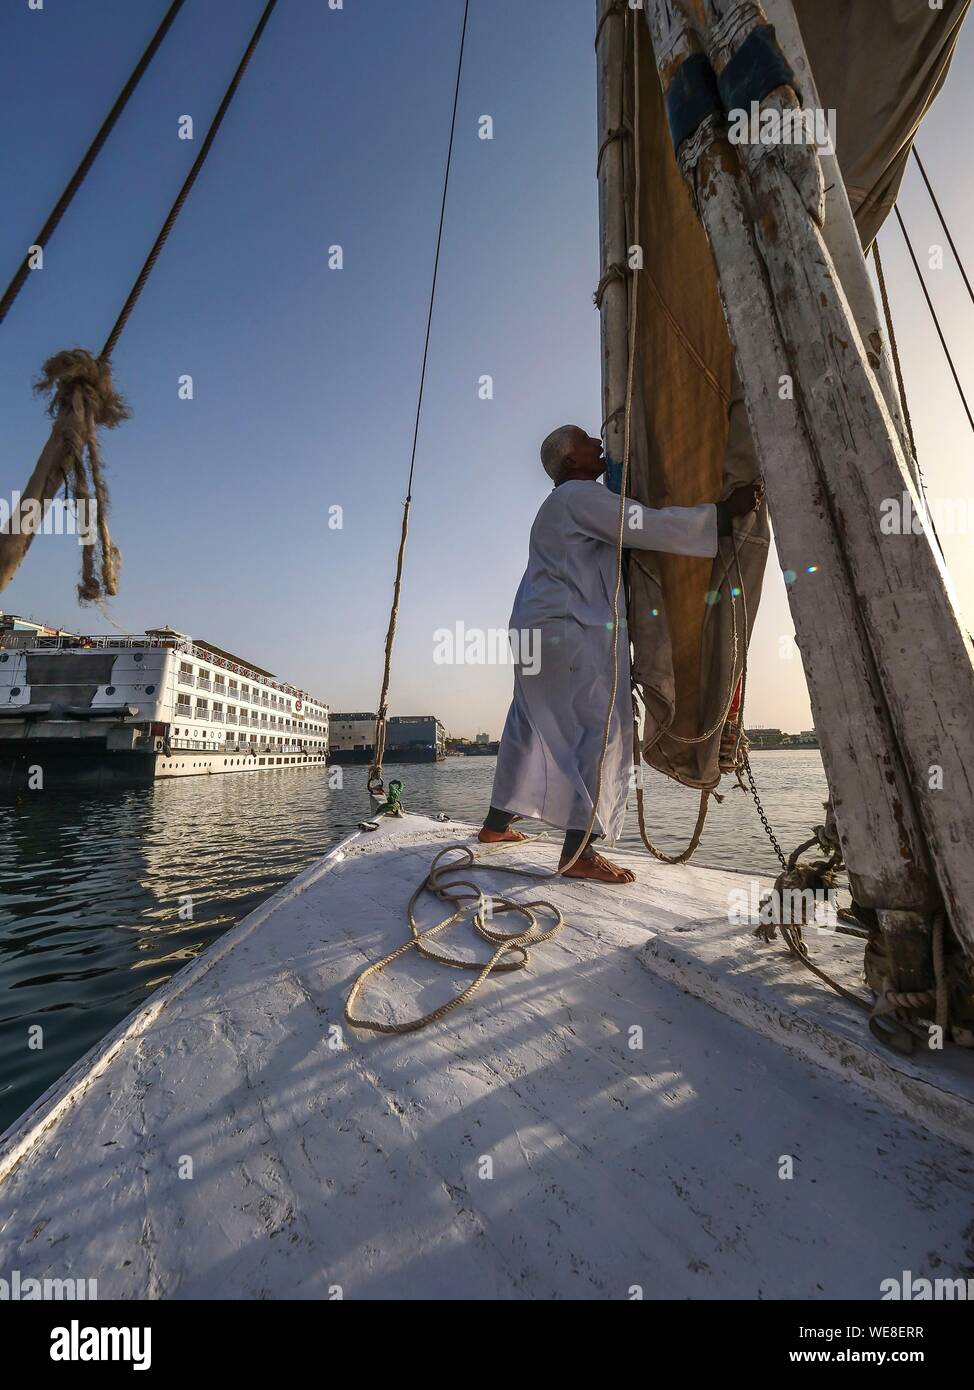 Egypt, Upper Egypt, Nubia, Nile Valley, Aswan, On board a felucca, the captain folds his sail before docking Stock Photo